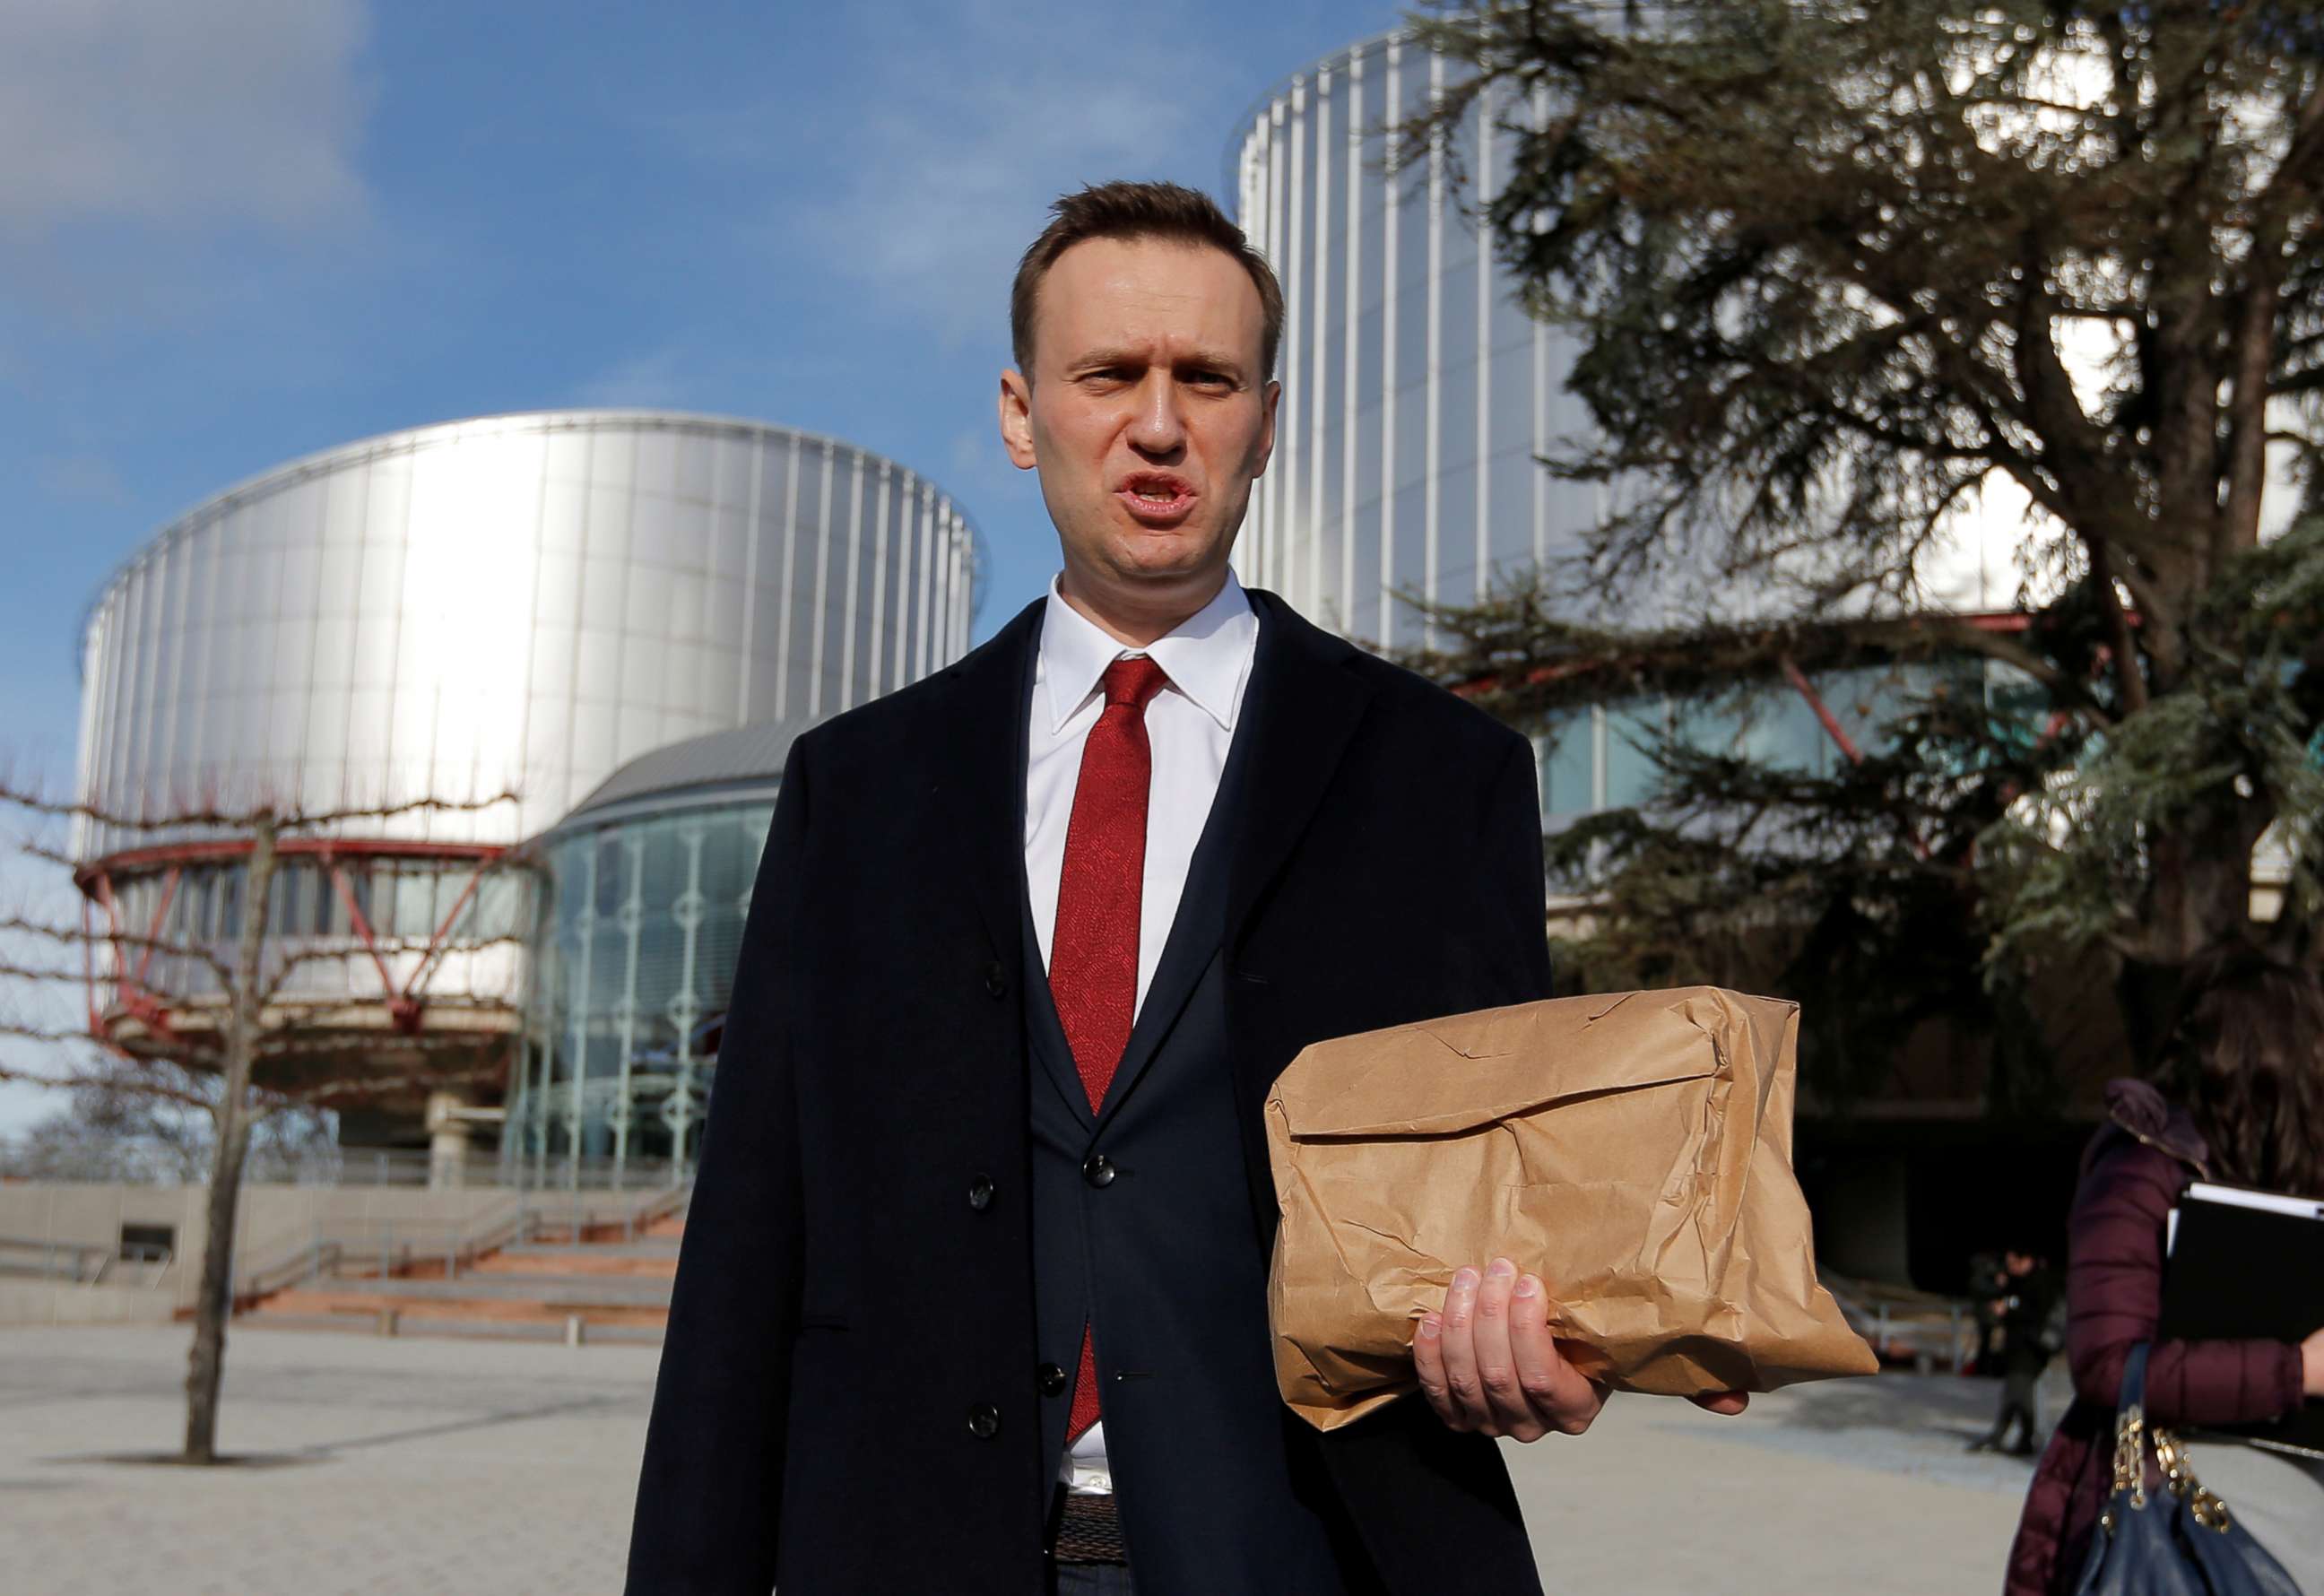 PHOTO: Russian opposition leader Alexei Navalny leaves the European court of Human Rights after a hearing regarding his case against Russia at the court in Strasbourg, France, Jan. 24, 2018.